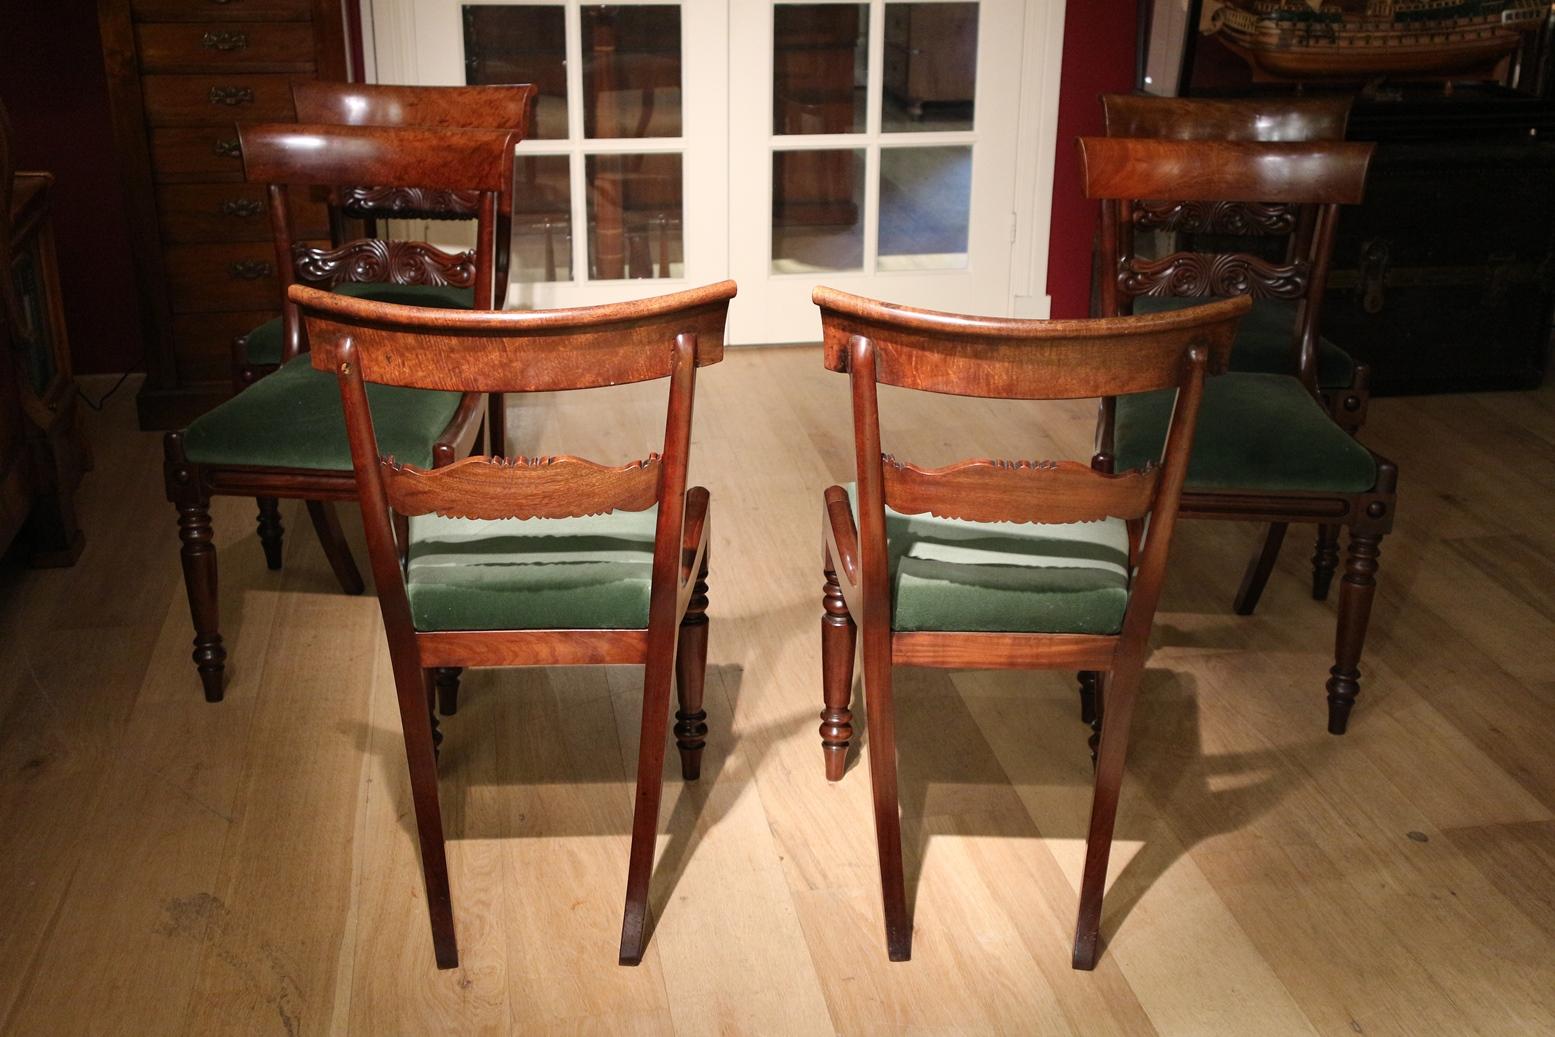 Mahogany Set of 6 Antique Regency Dining Room Chairs